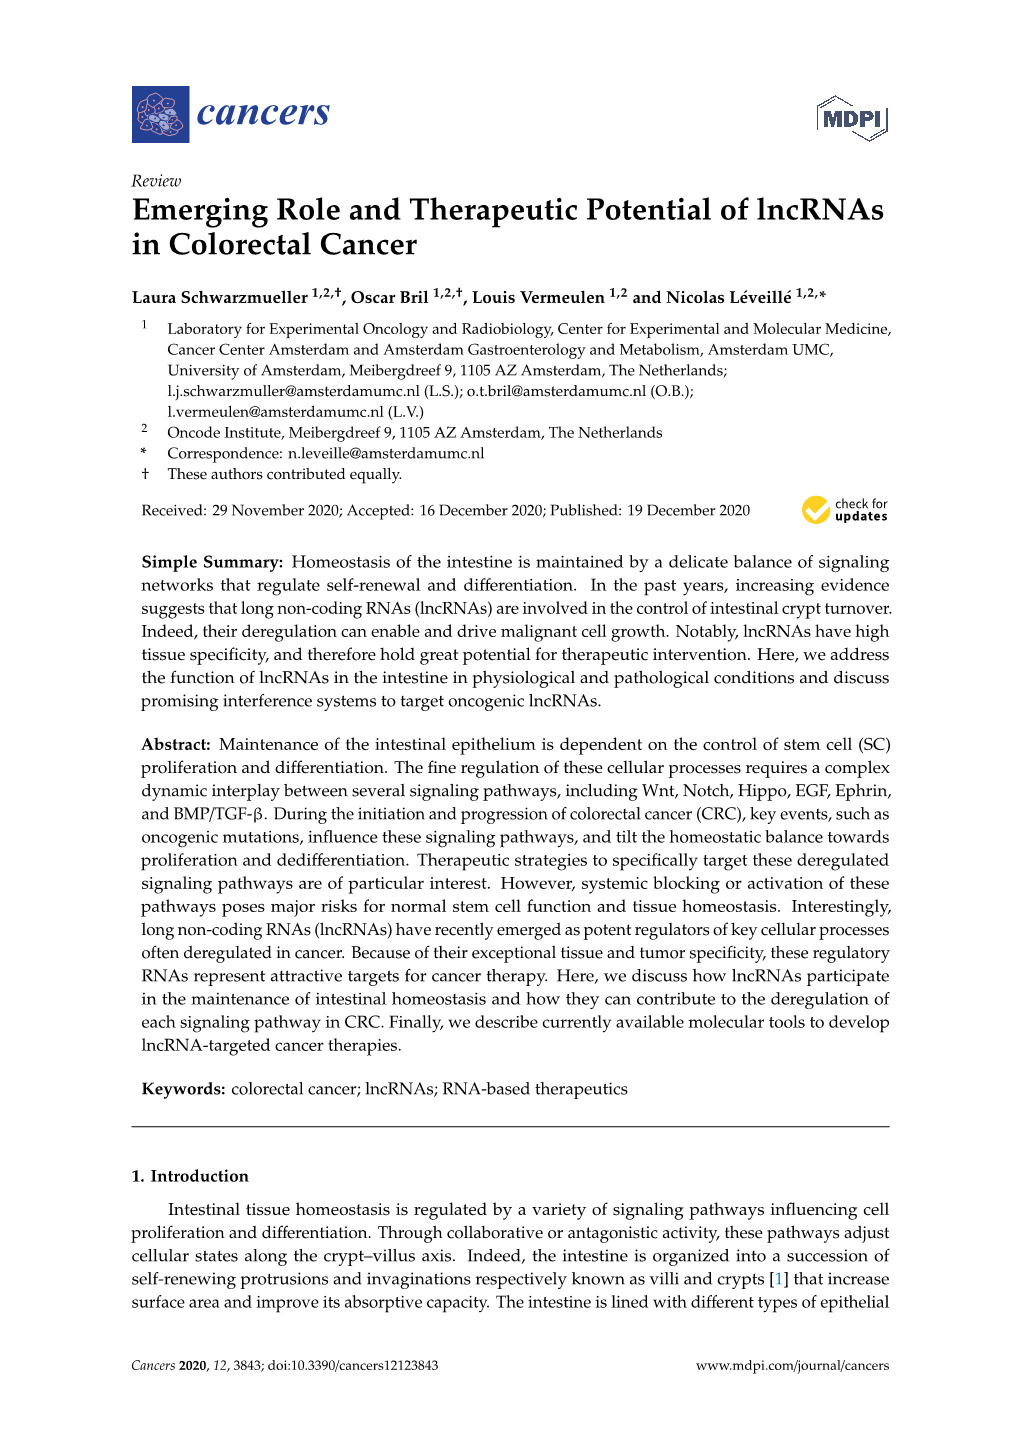 Emerging Role and Therapeutic Potential of Lncrnas in Colorectal Cancer